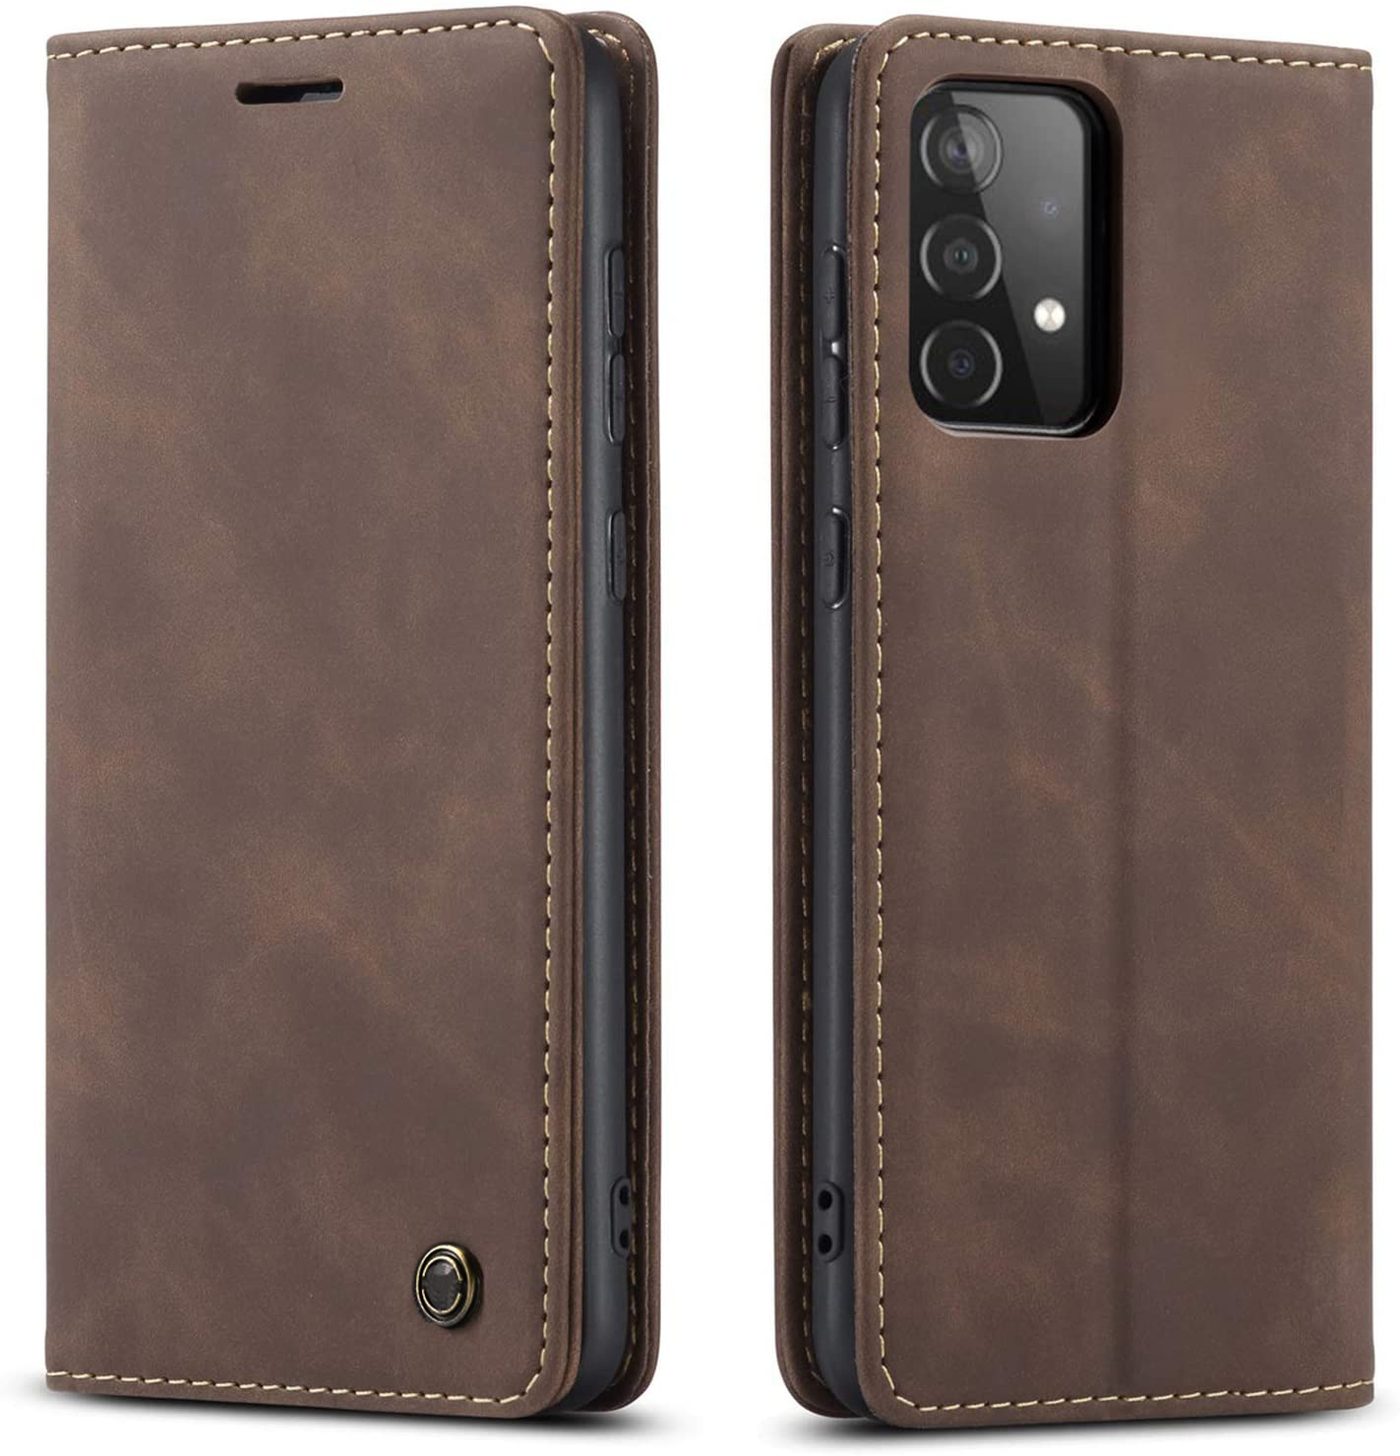 Samsung Galaxy A72 coffee color leather wallet flip cover case By excelsior